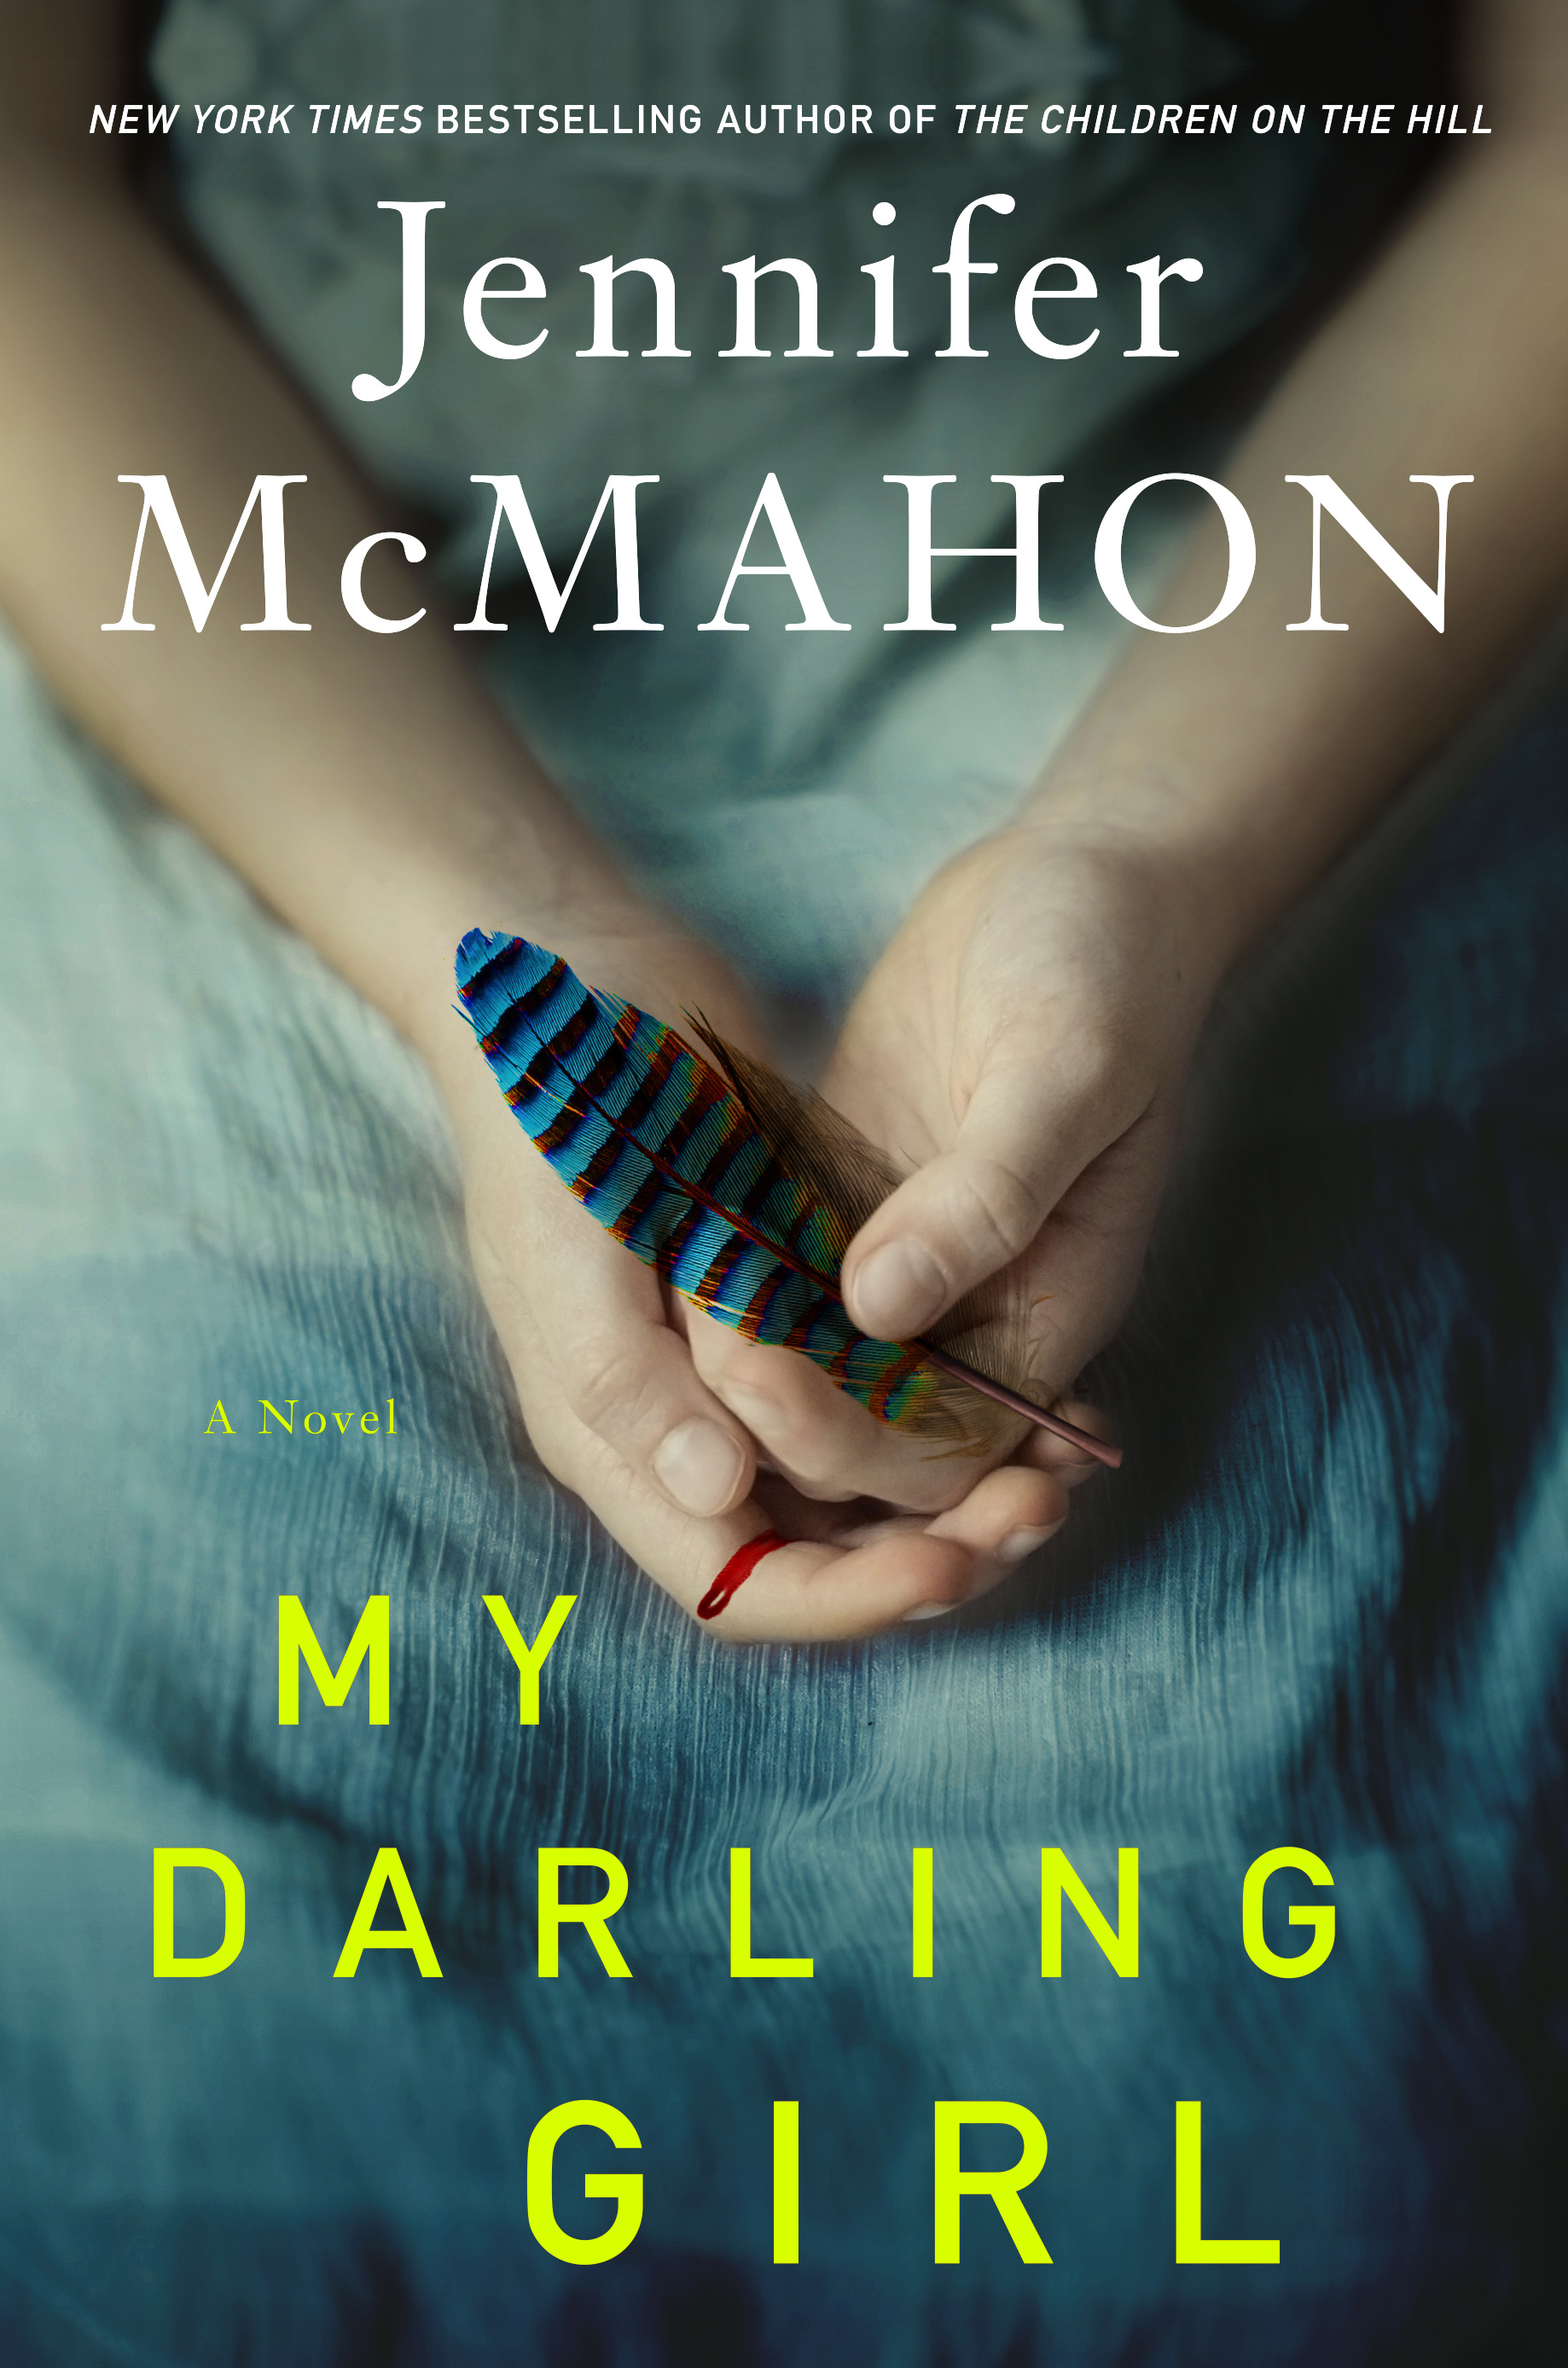 Image for "My Darling Girl"